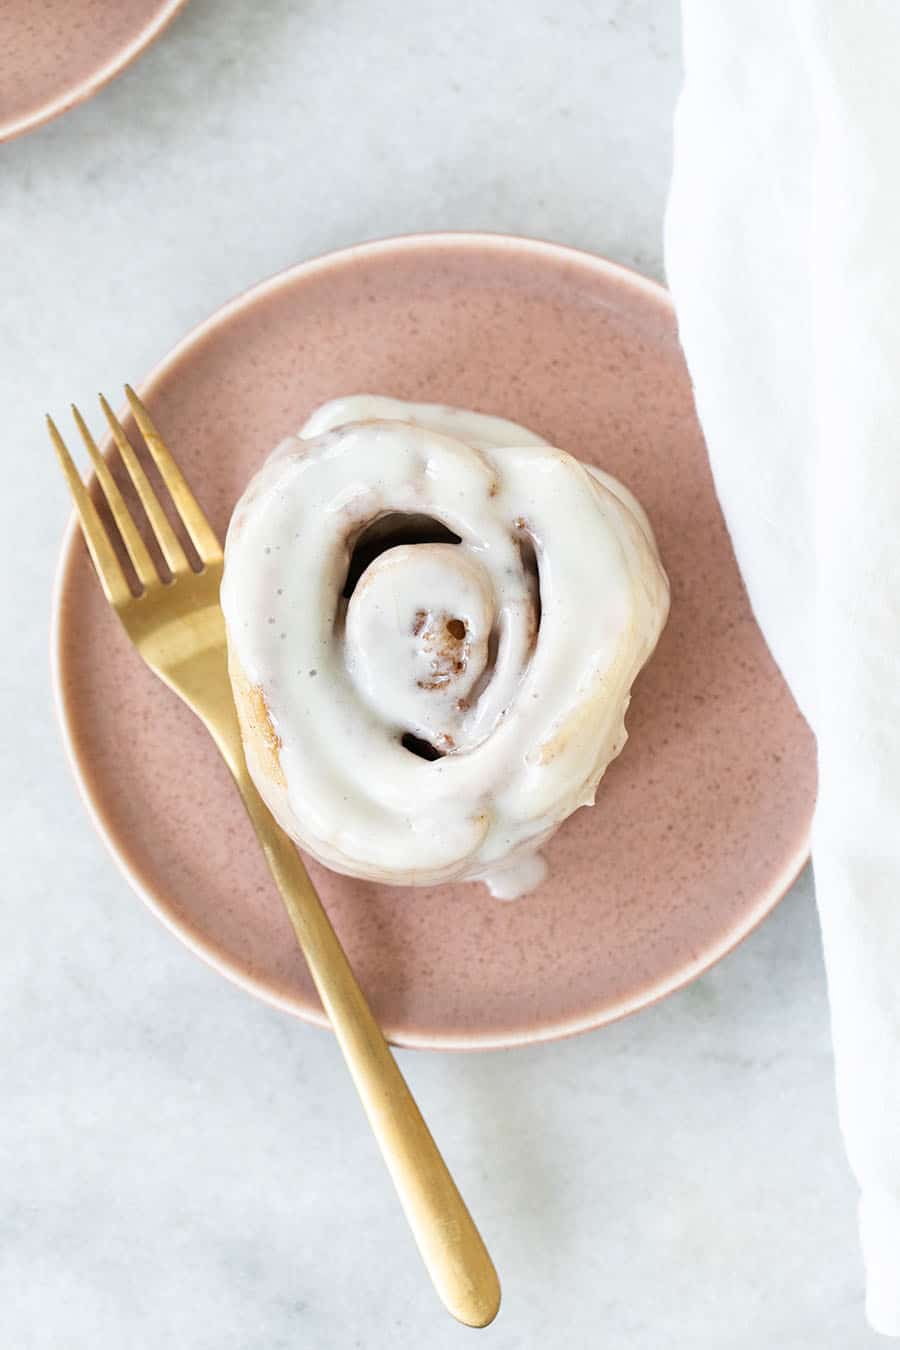 Cinnamon roll on a pink plate with gold fork.